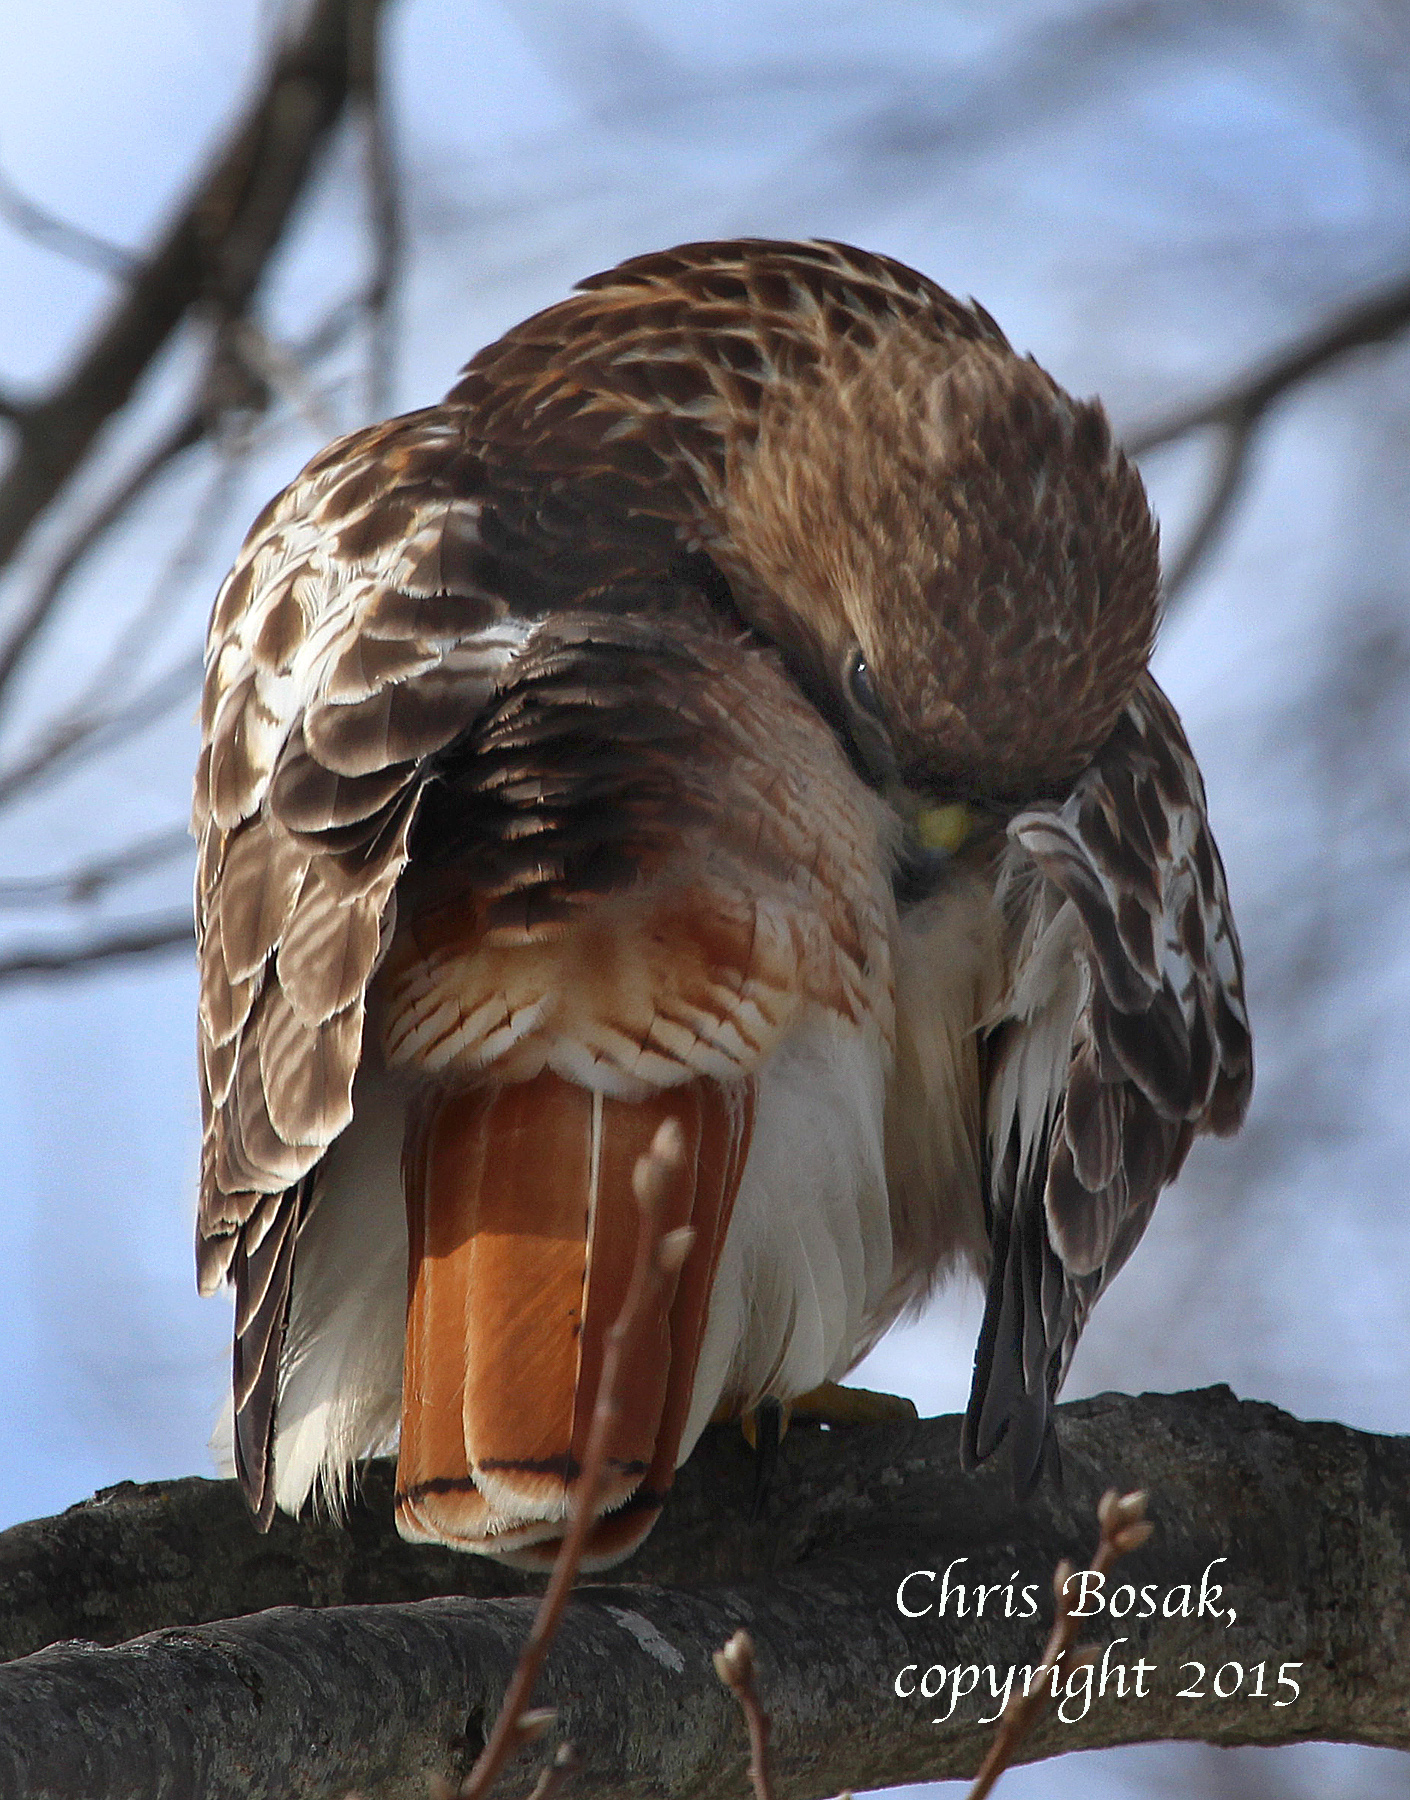 Photo by Chris Bosak A Red-tailed hawk preens at Weed Beach in Darien, Conn., January 2015.